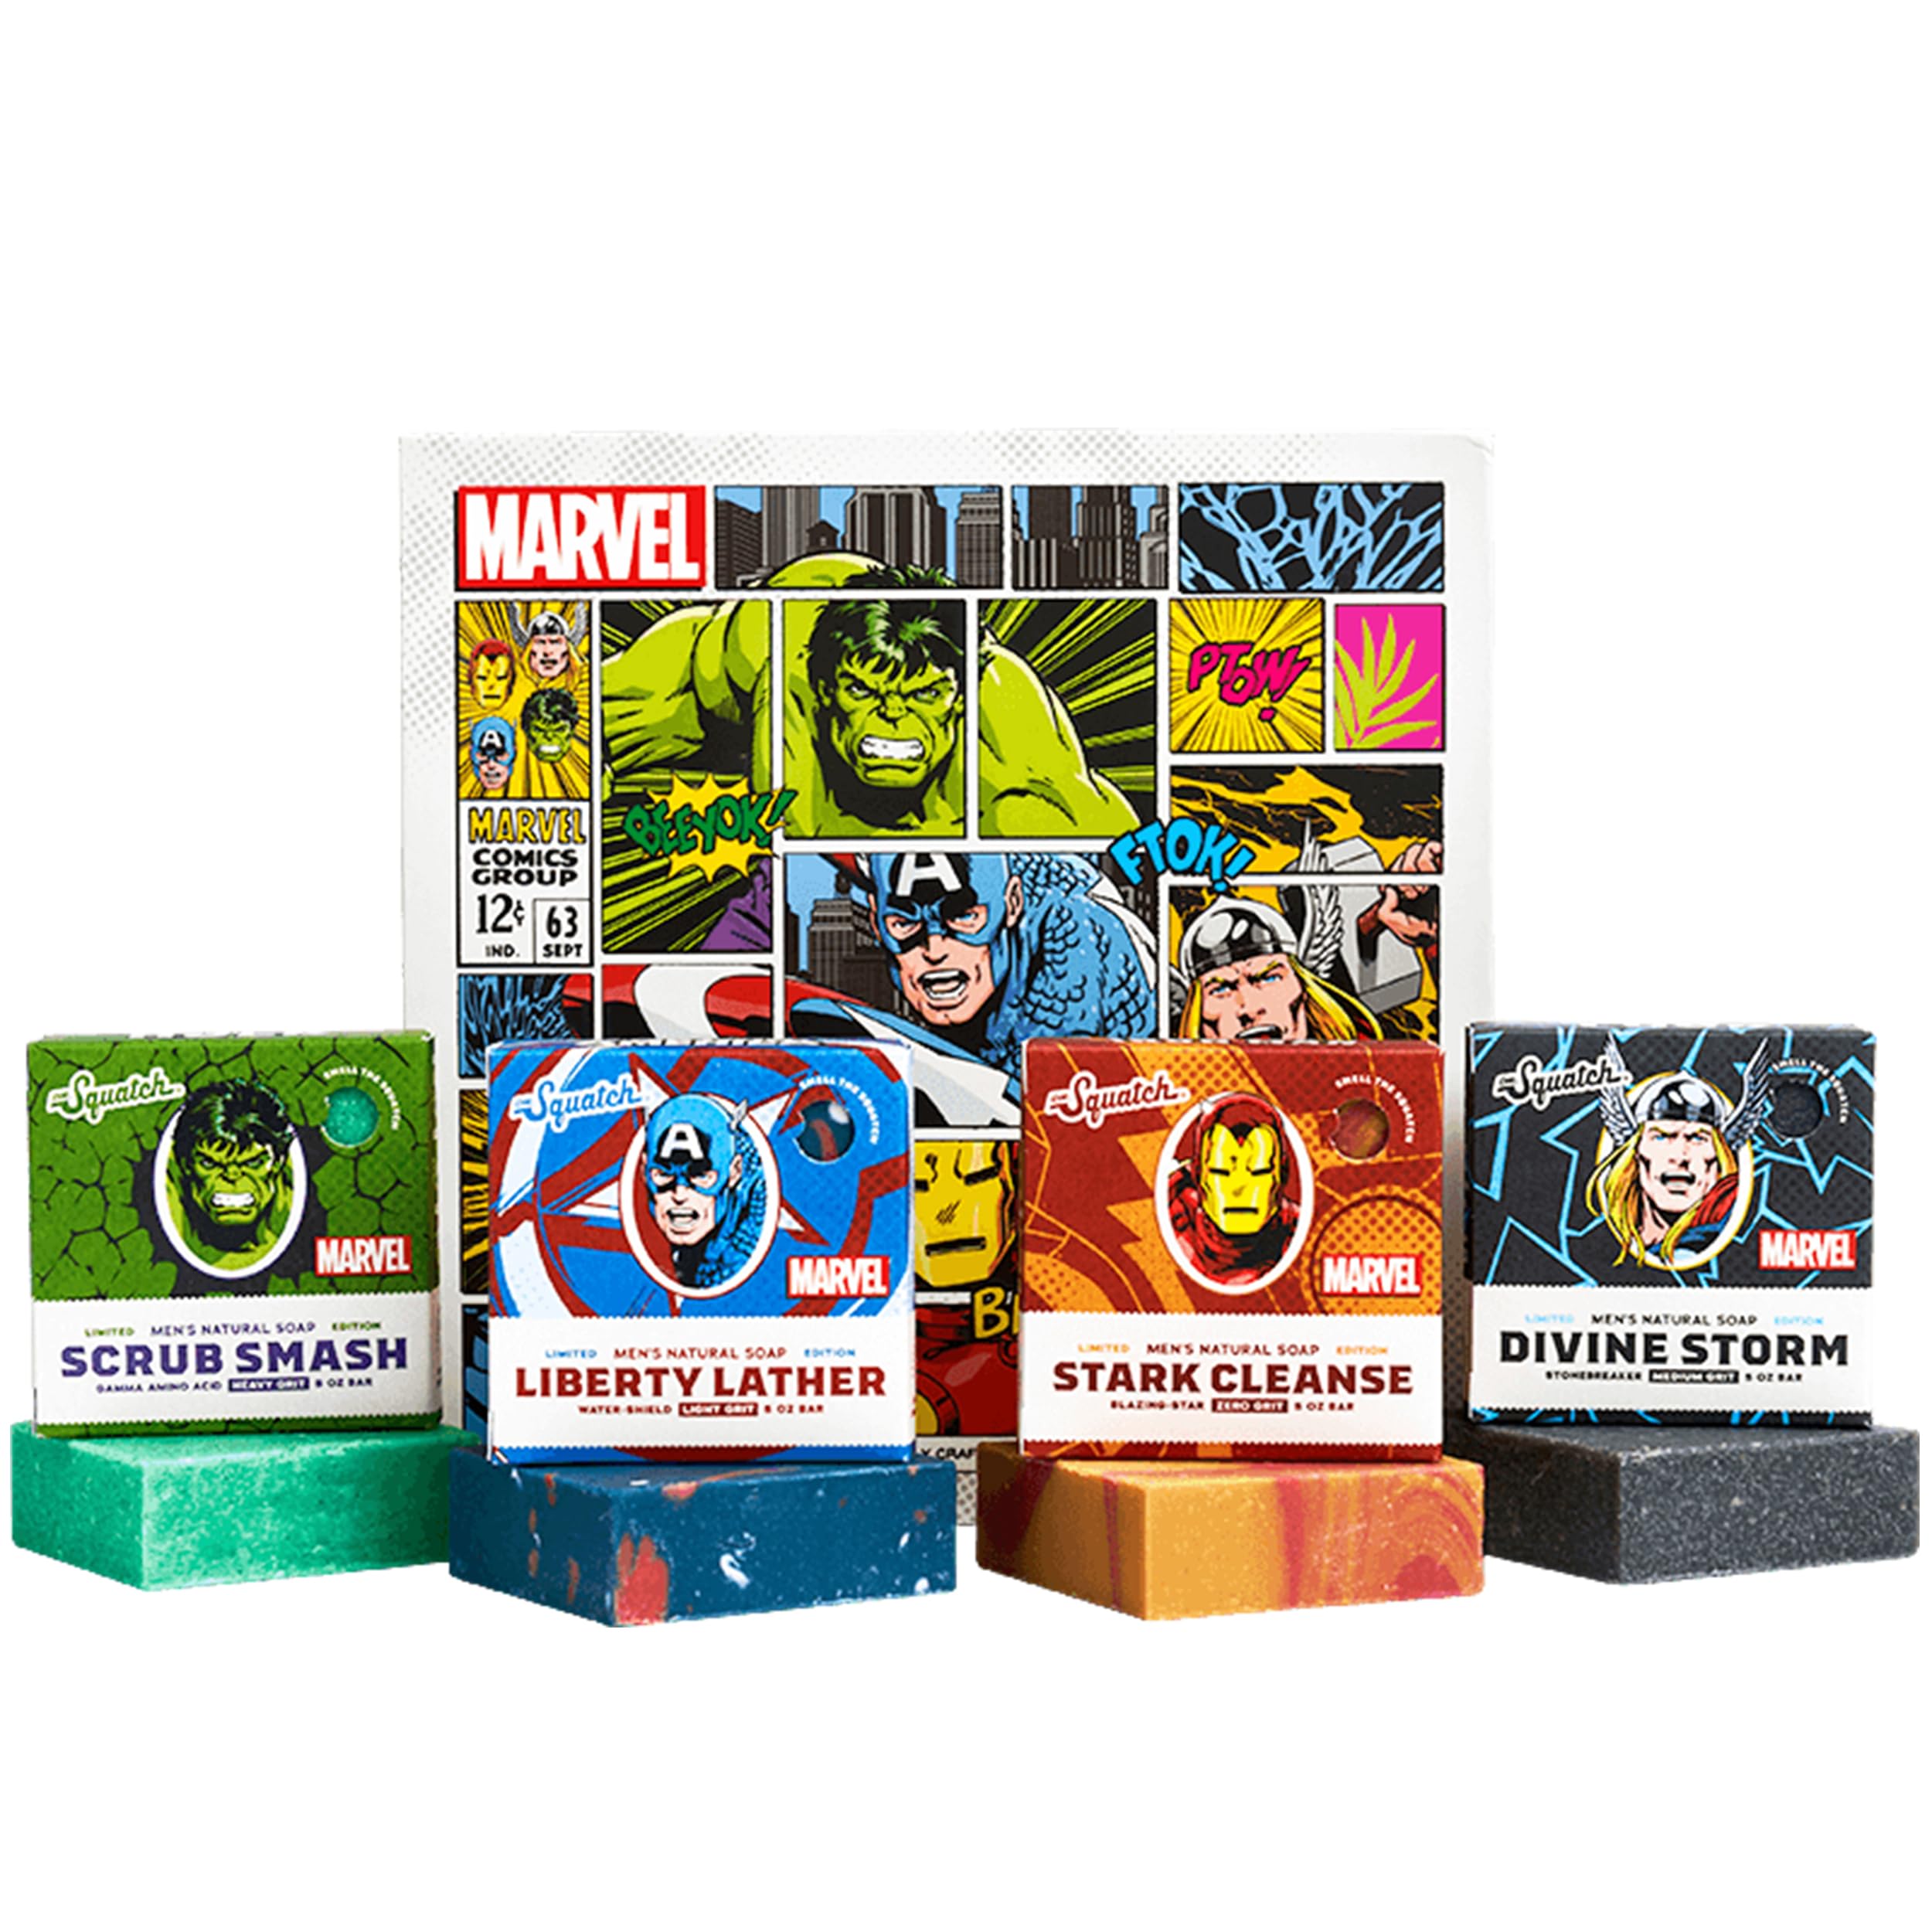 Dr. Squatch Soap Avengers Collection with Collector’s Box - Men’s Natural Bar Soap - 4 Bar Soap Bundle and Collector’s Box - Soap inspired by the Incredible Hulk, Iron Man, Thor, Captain America